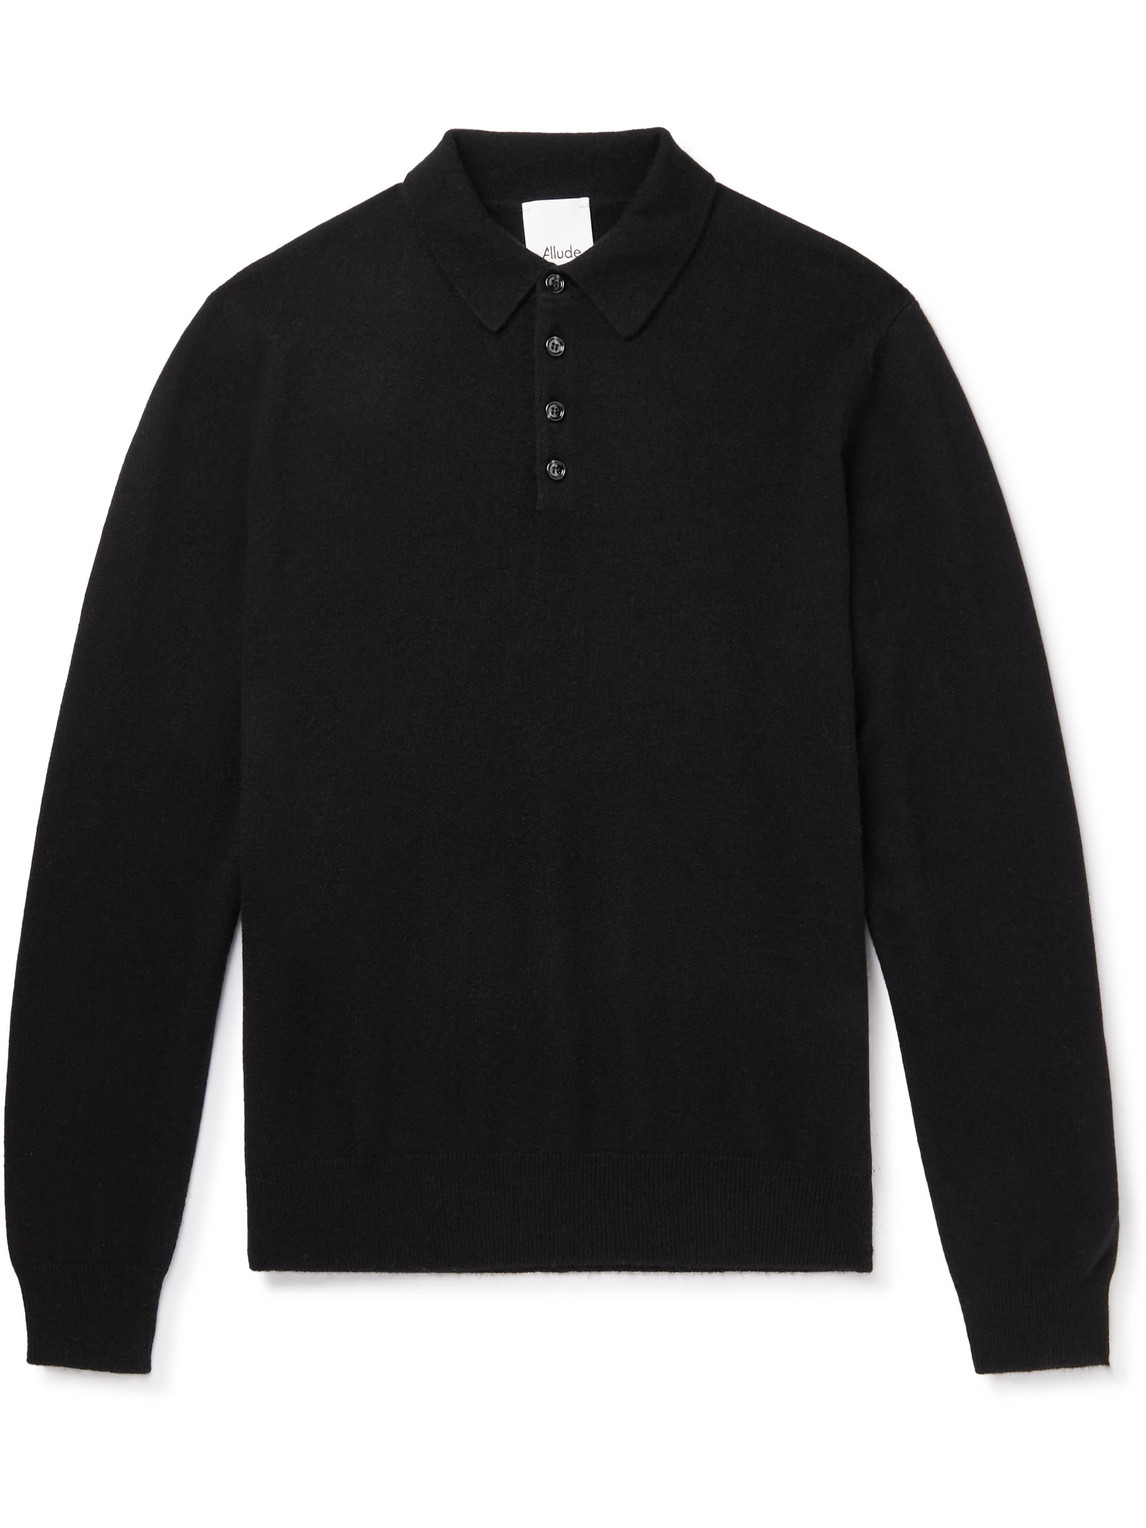 Allude Cashmere Polo Shirt In Black